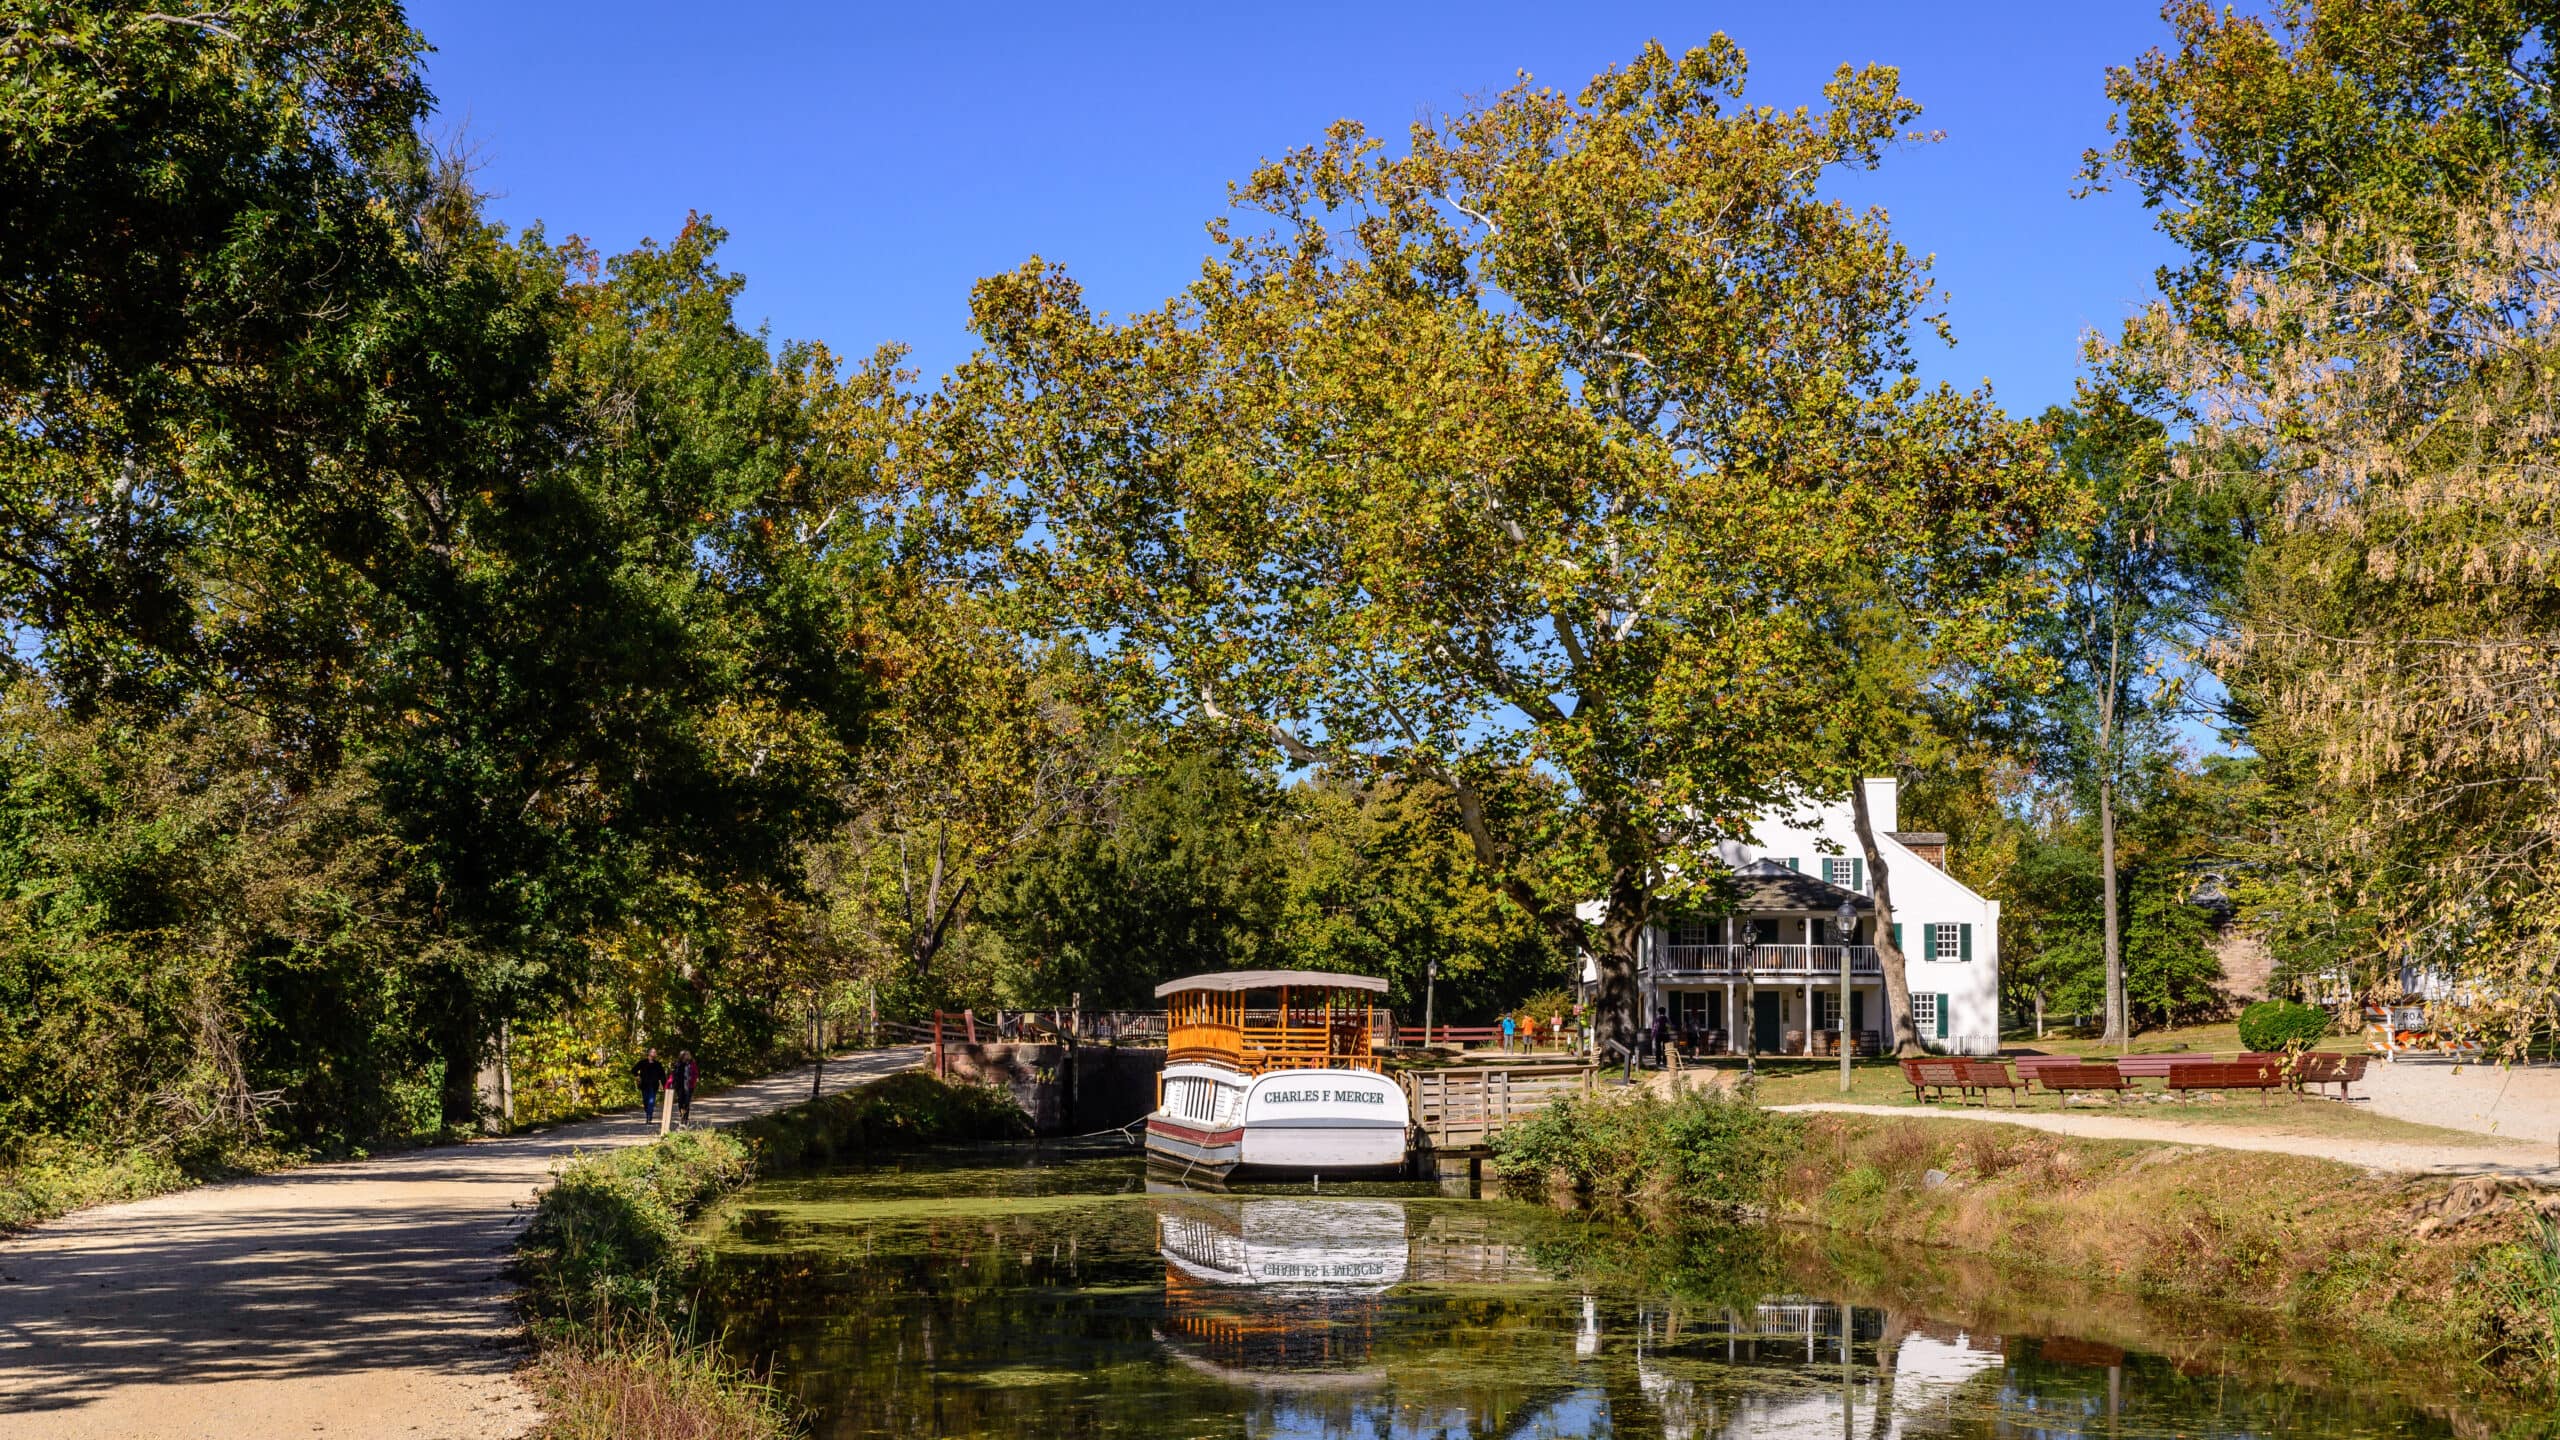 A landscape picture of the Great Falls Tavern Visitors Center and a boat in water. On the left side of the photo is a part of the towpath.